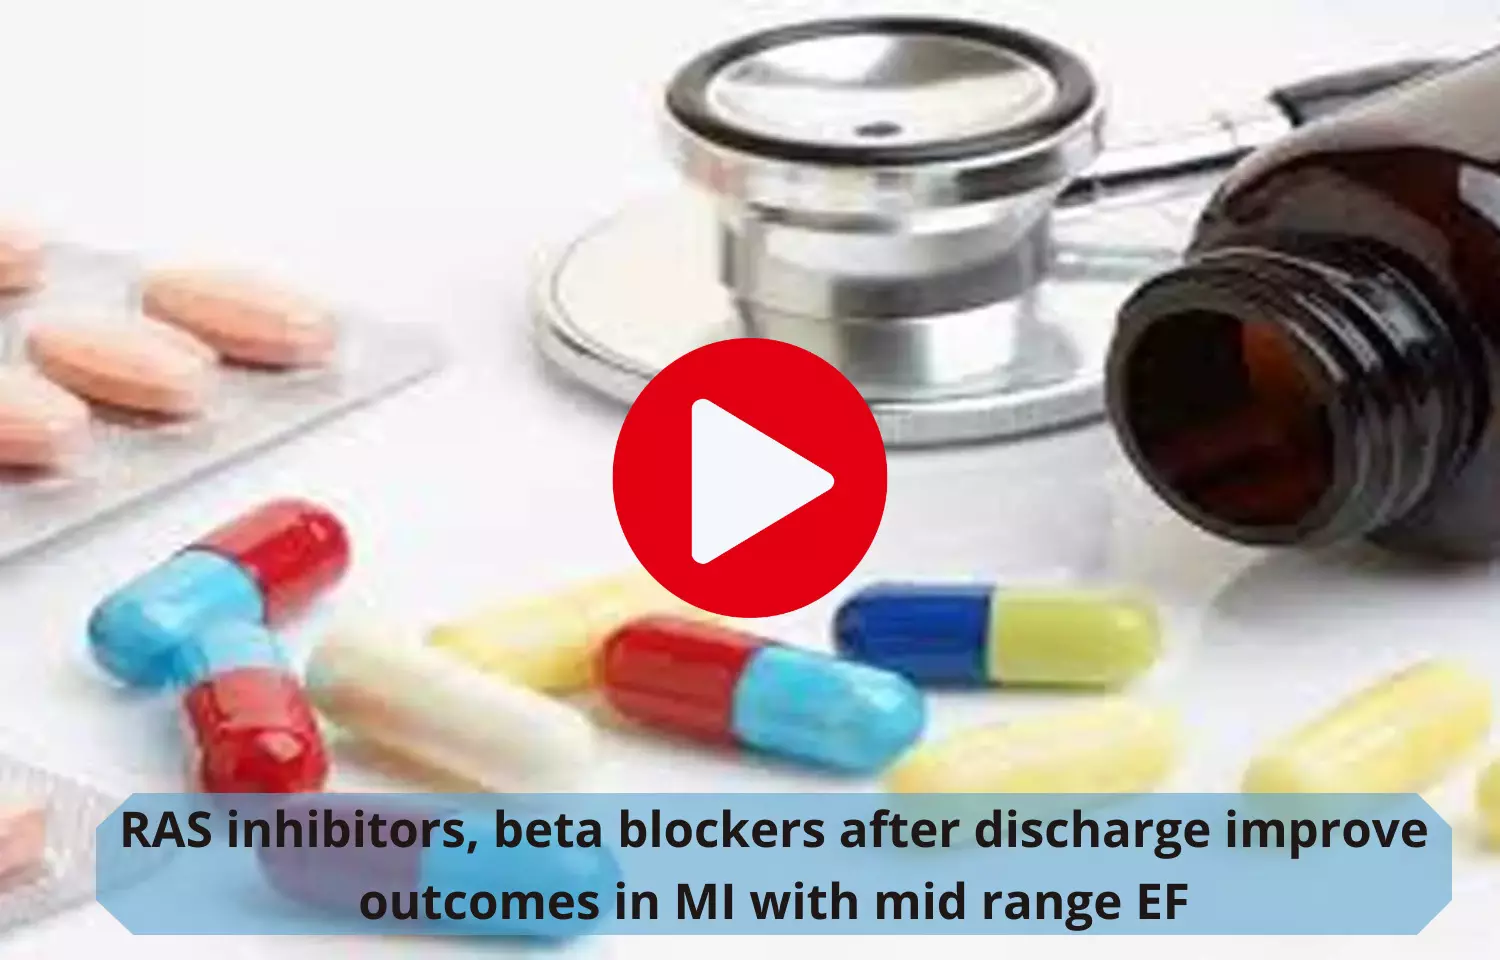 RAS inhibitors, beta blockers after discharge improve outcomes in MI with mid range EF